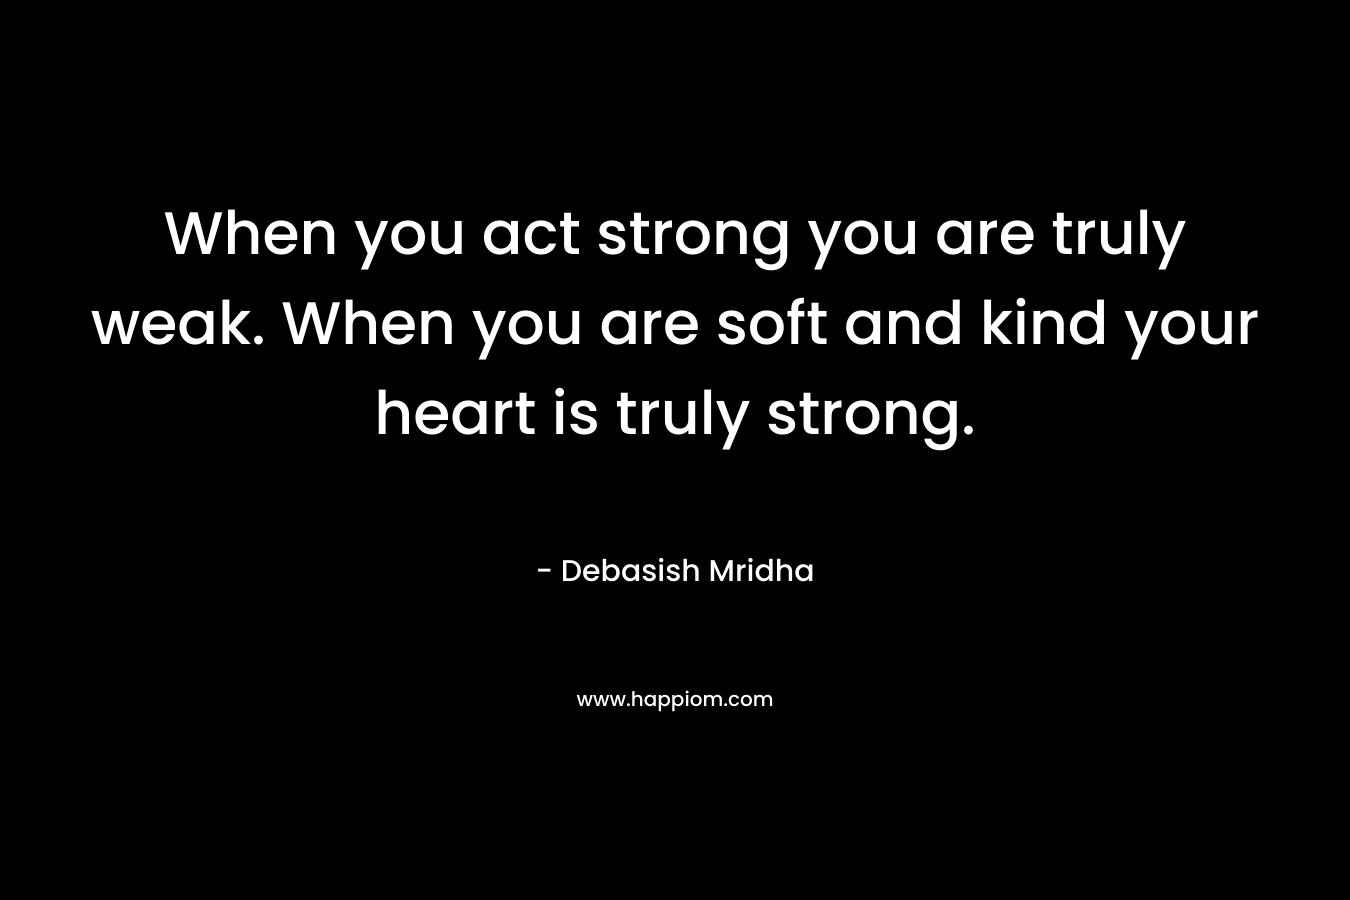 When you act strong you are truly weak. When you are soft and kind your heart is truly strong.